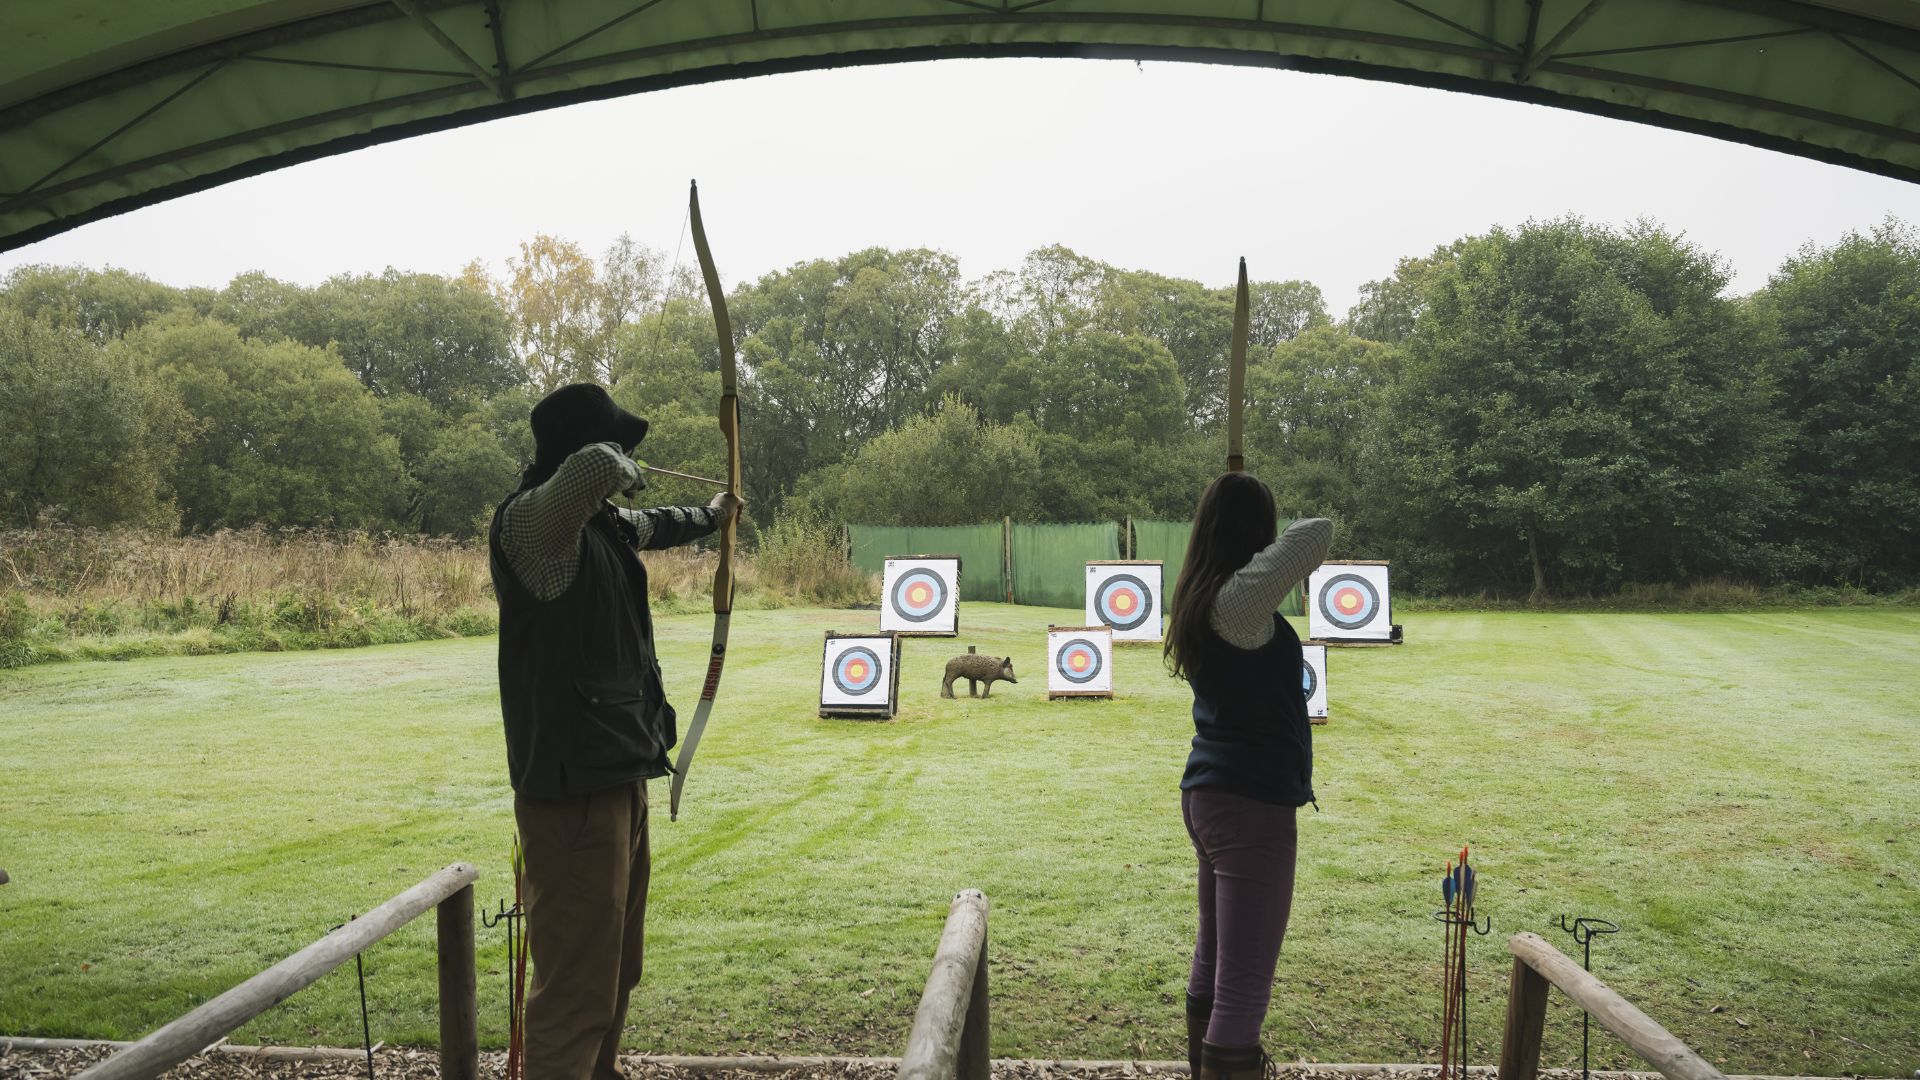 Couple taking aim with bow and arrows